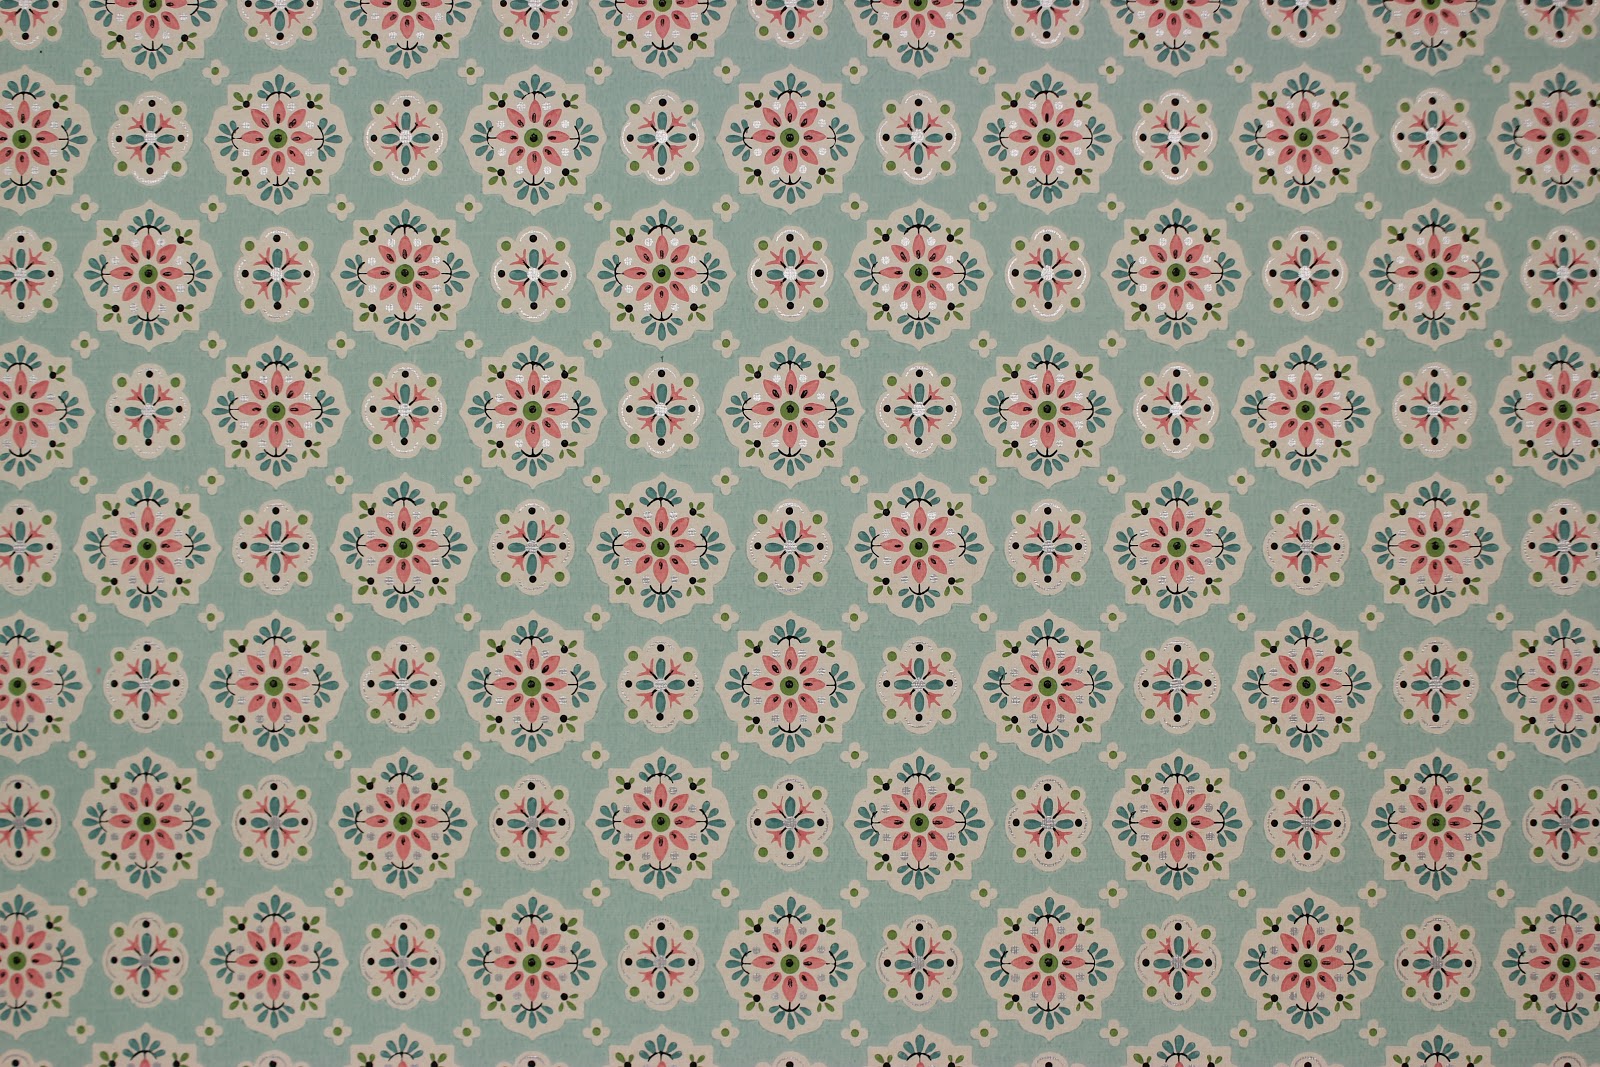 Floral Vintage Wallpaper Quotes For Iphonr